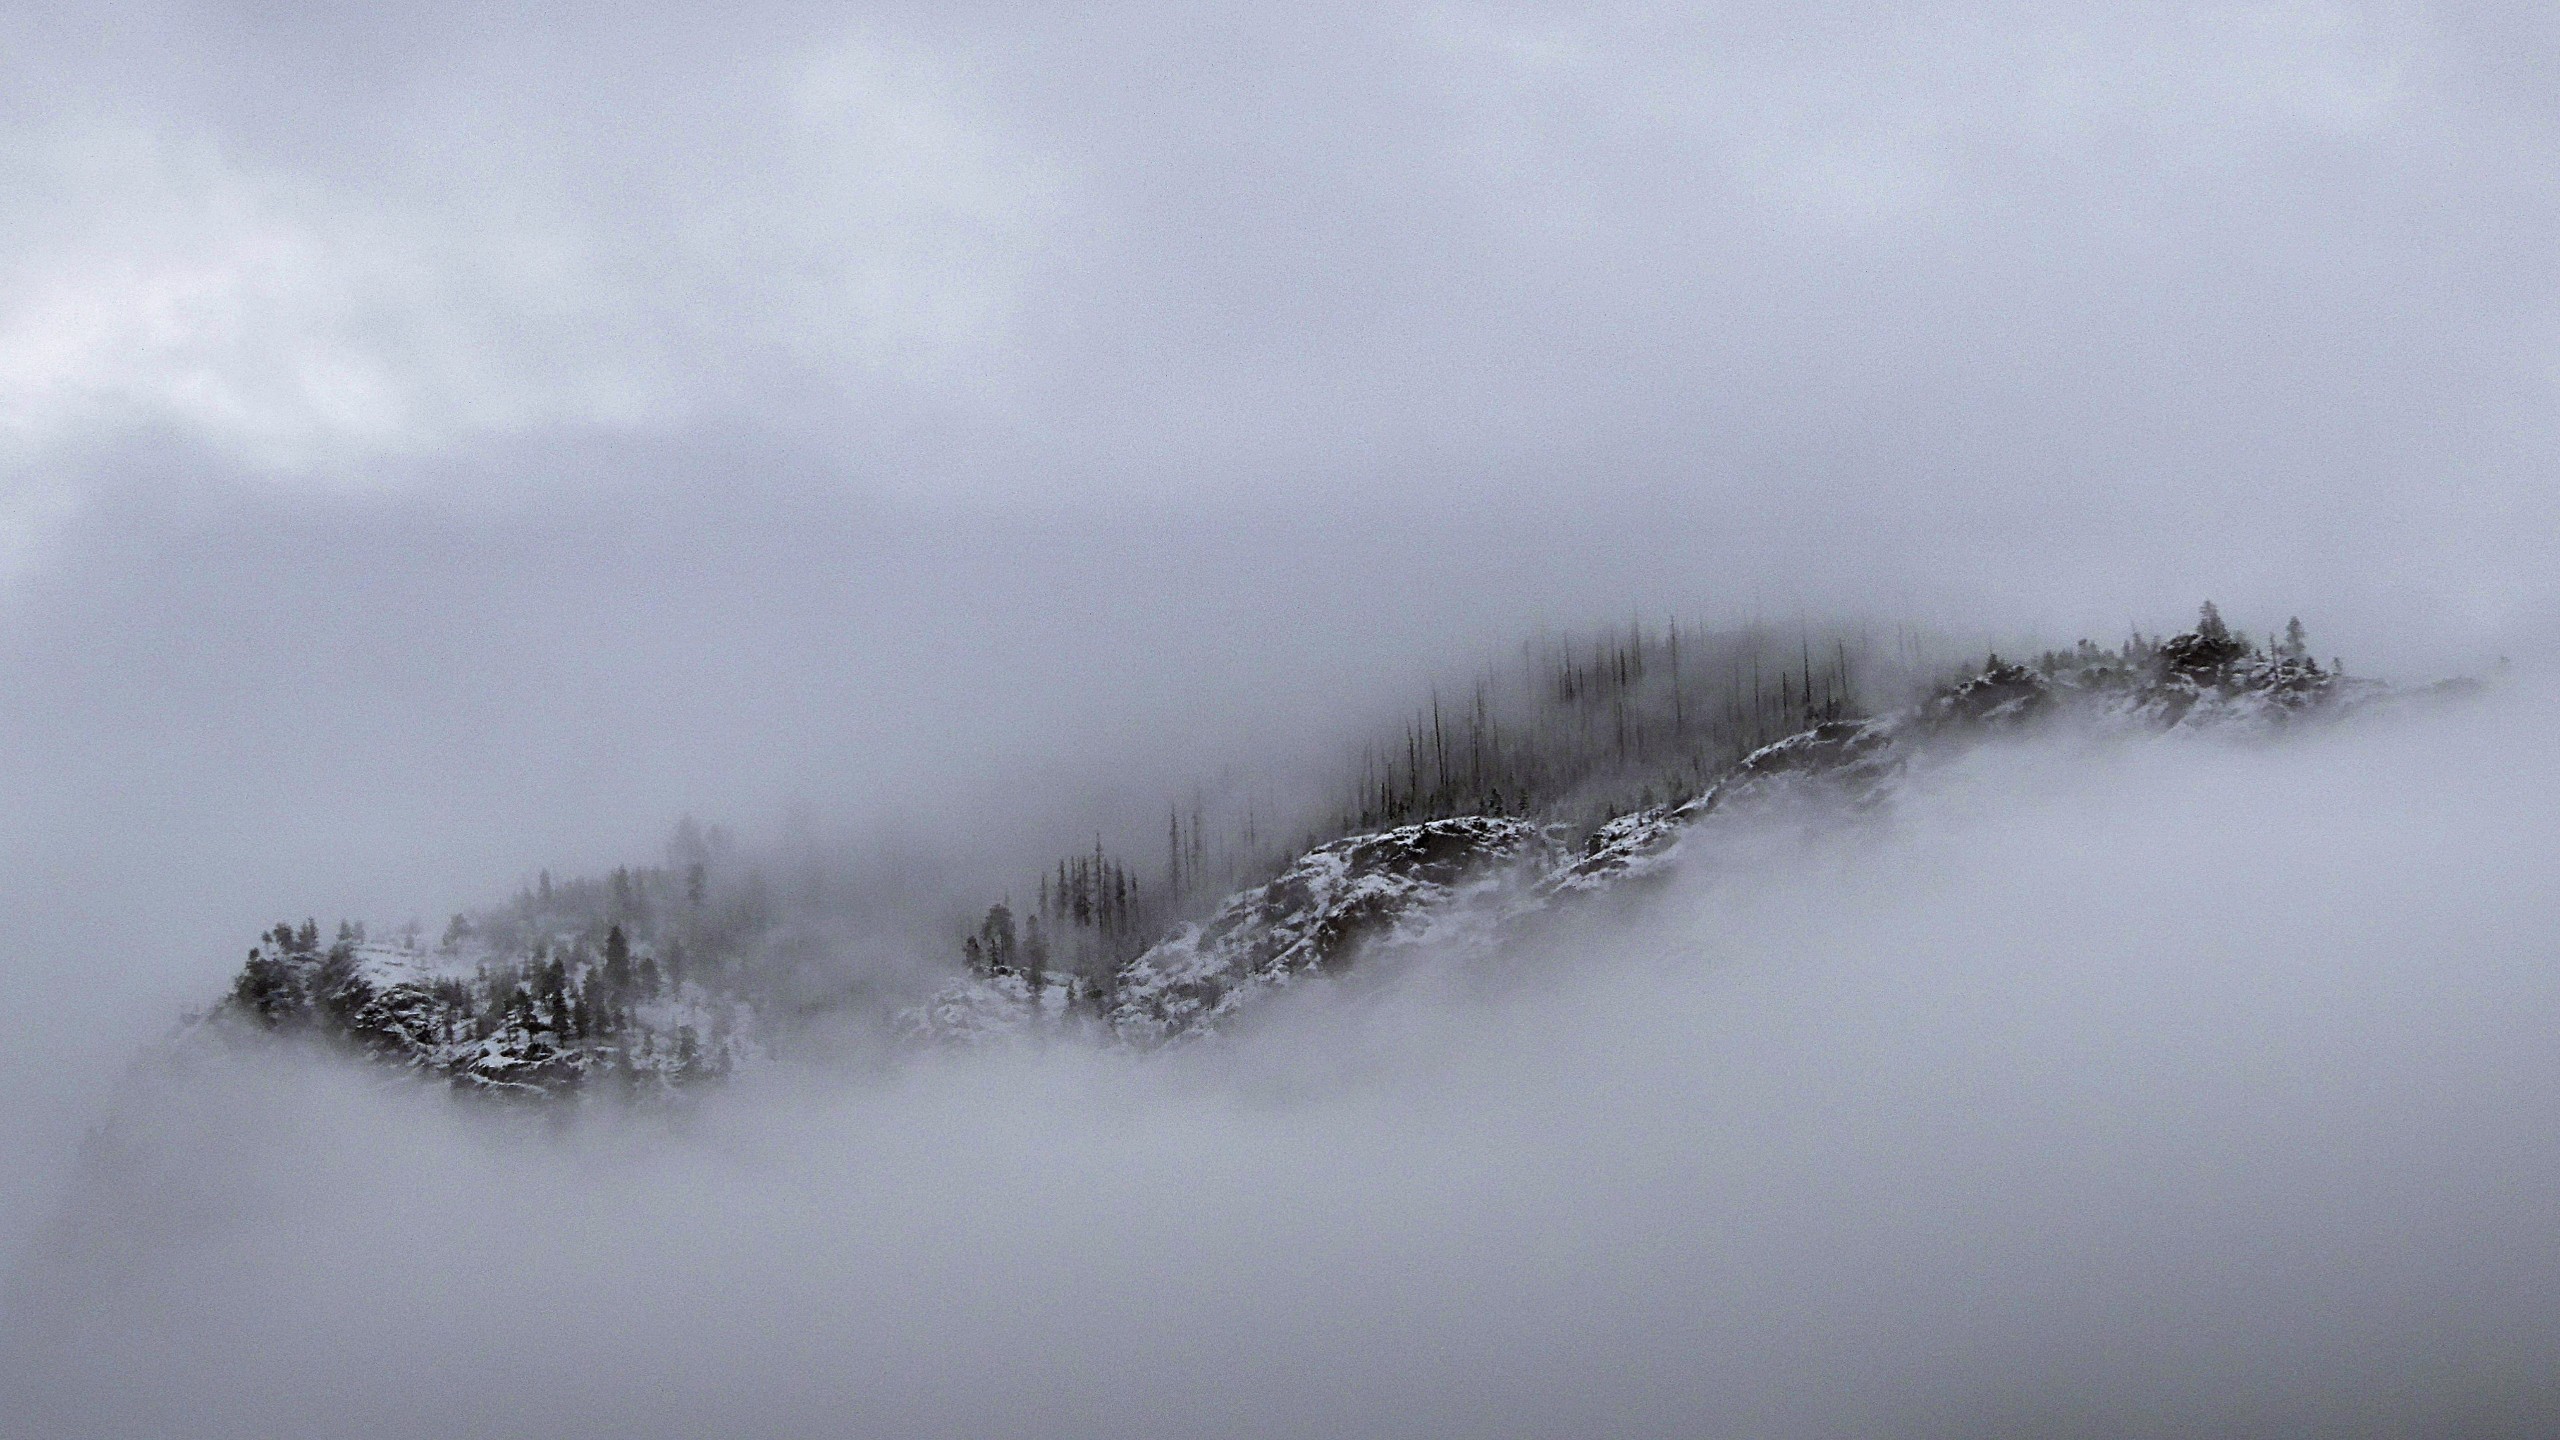 General 2560x1440 mountains snow Montana mist clouds USA nature cold ice